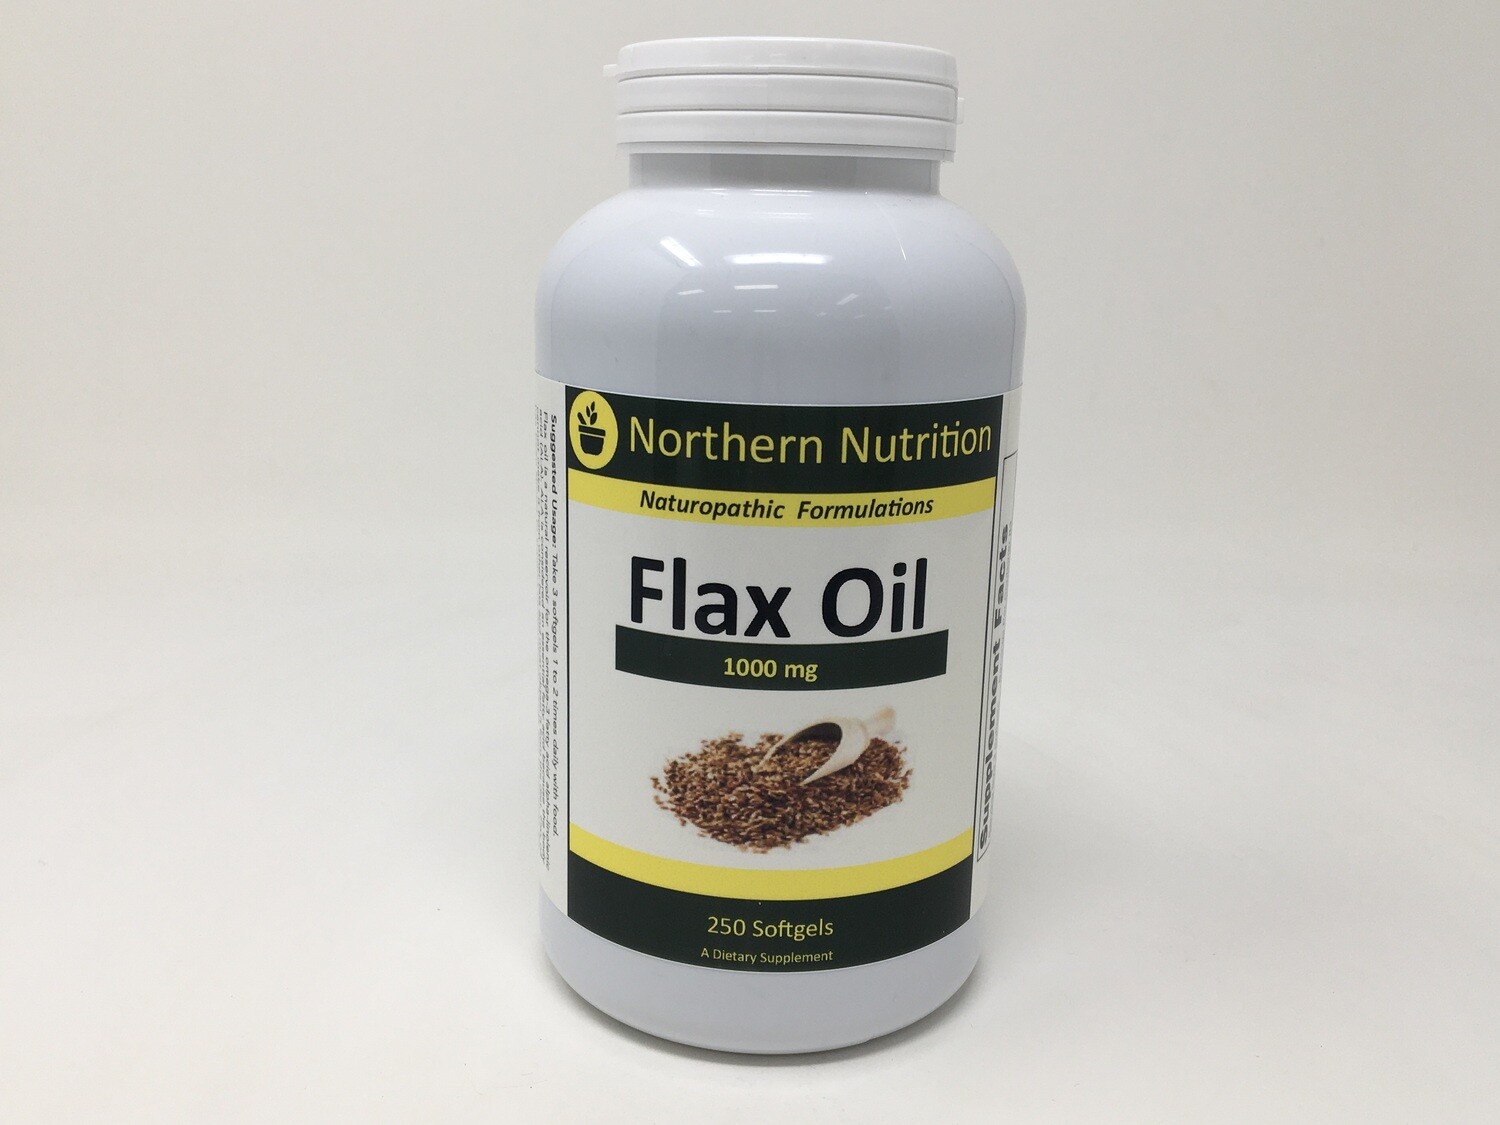 Flax Oil 1000mg 250sg (Northern Nutrition)